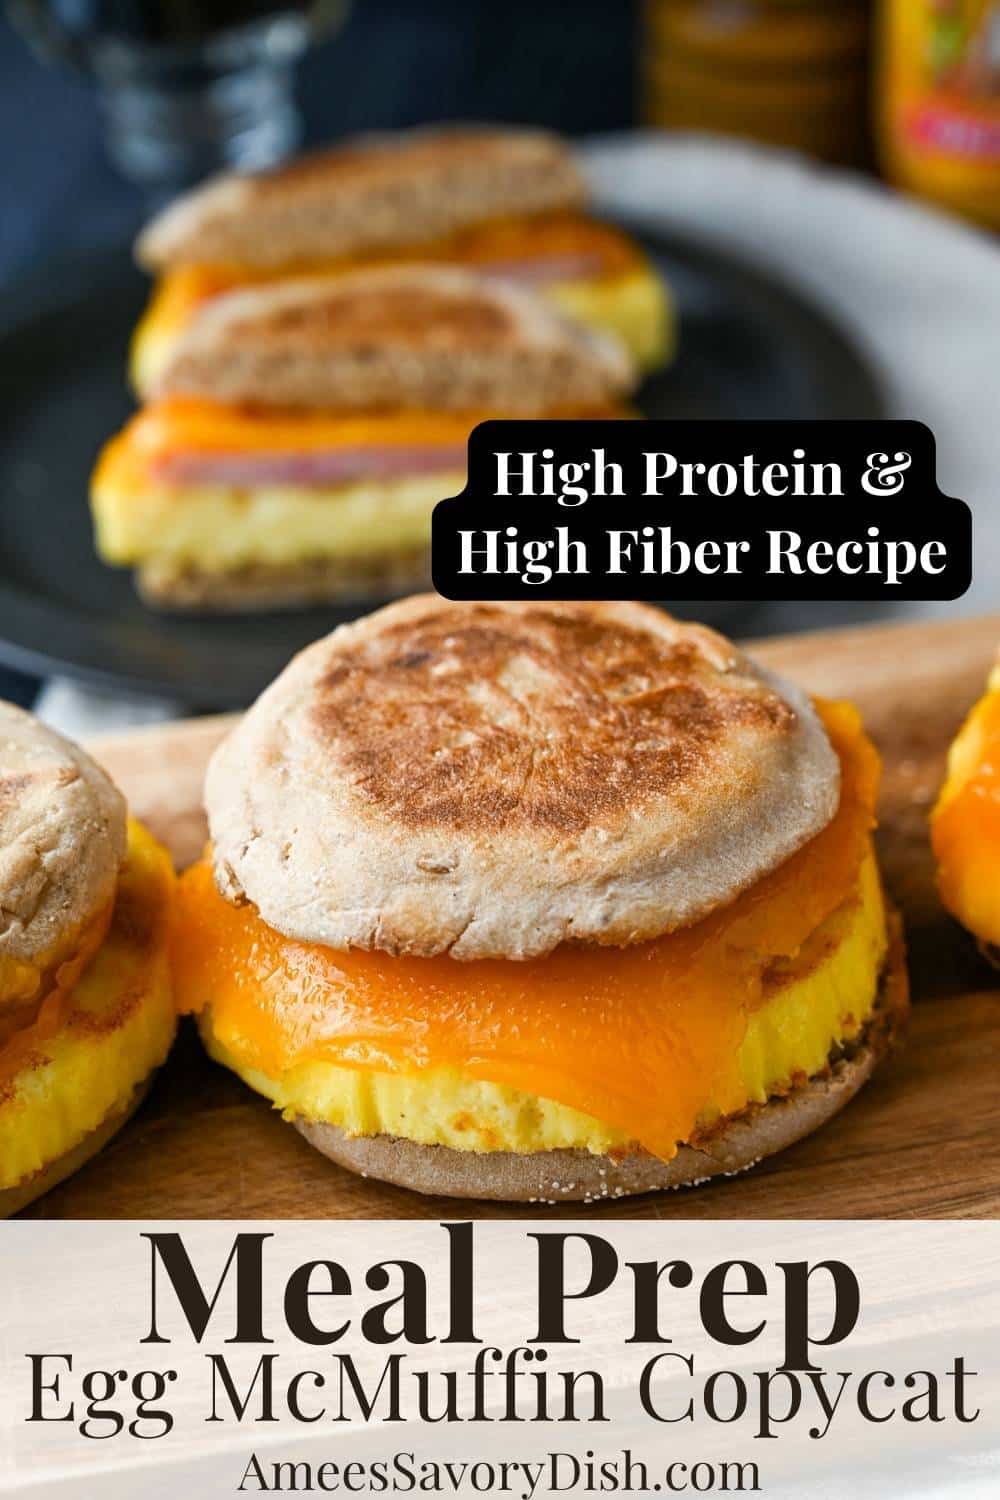 A meal prep-friendly copycat healthy Egg McMuffin recipe that's not only delicious but also packed with protein and fiber. via @Ameessavorydish